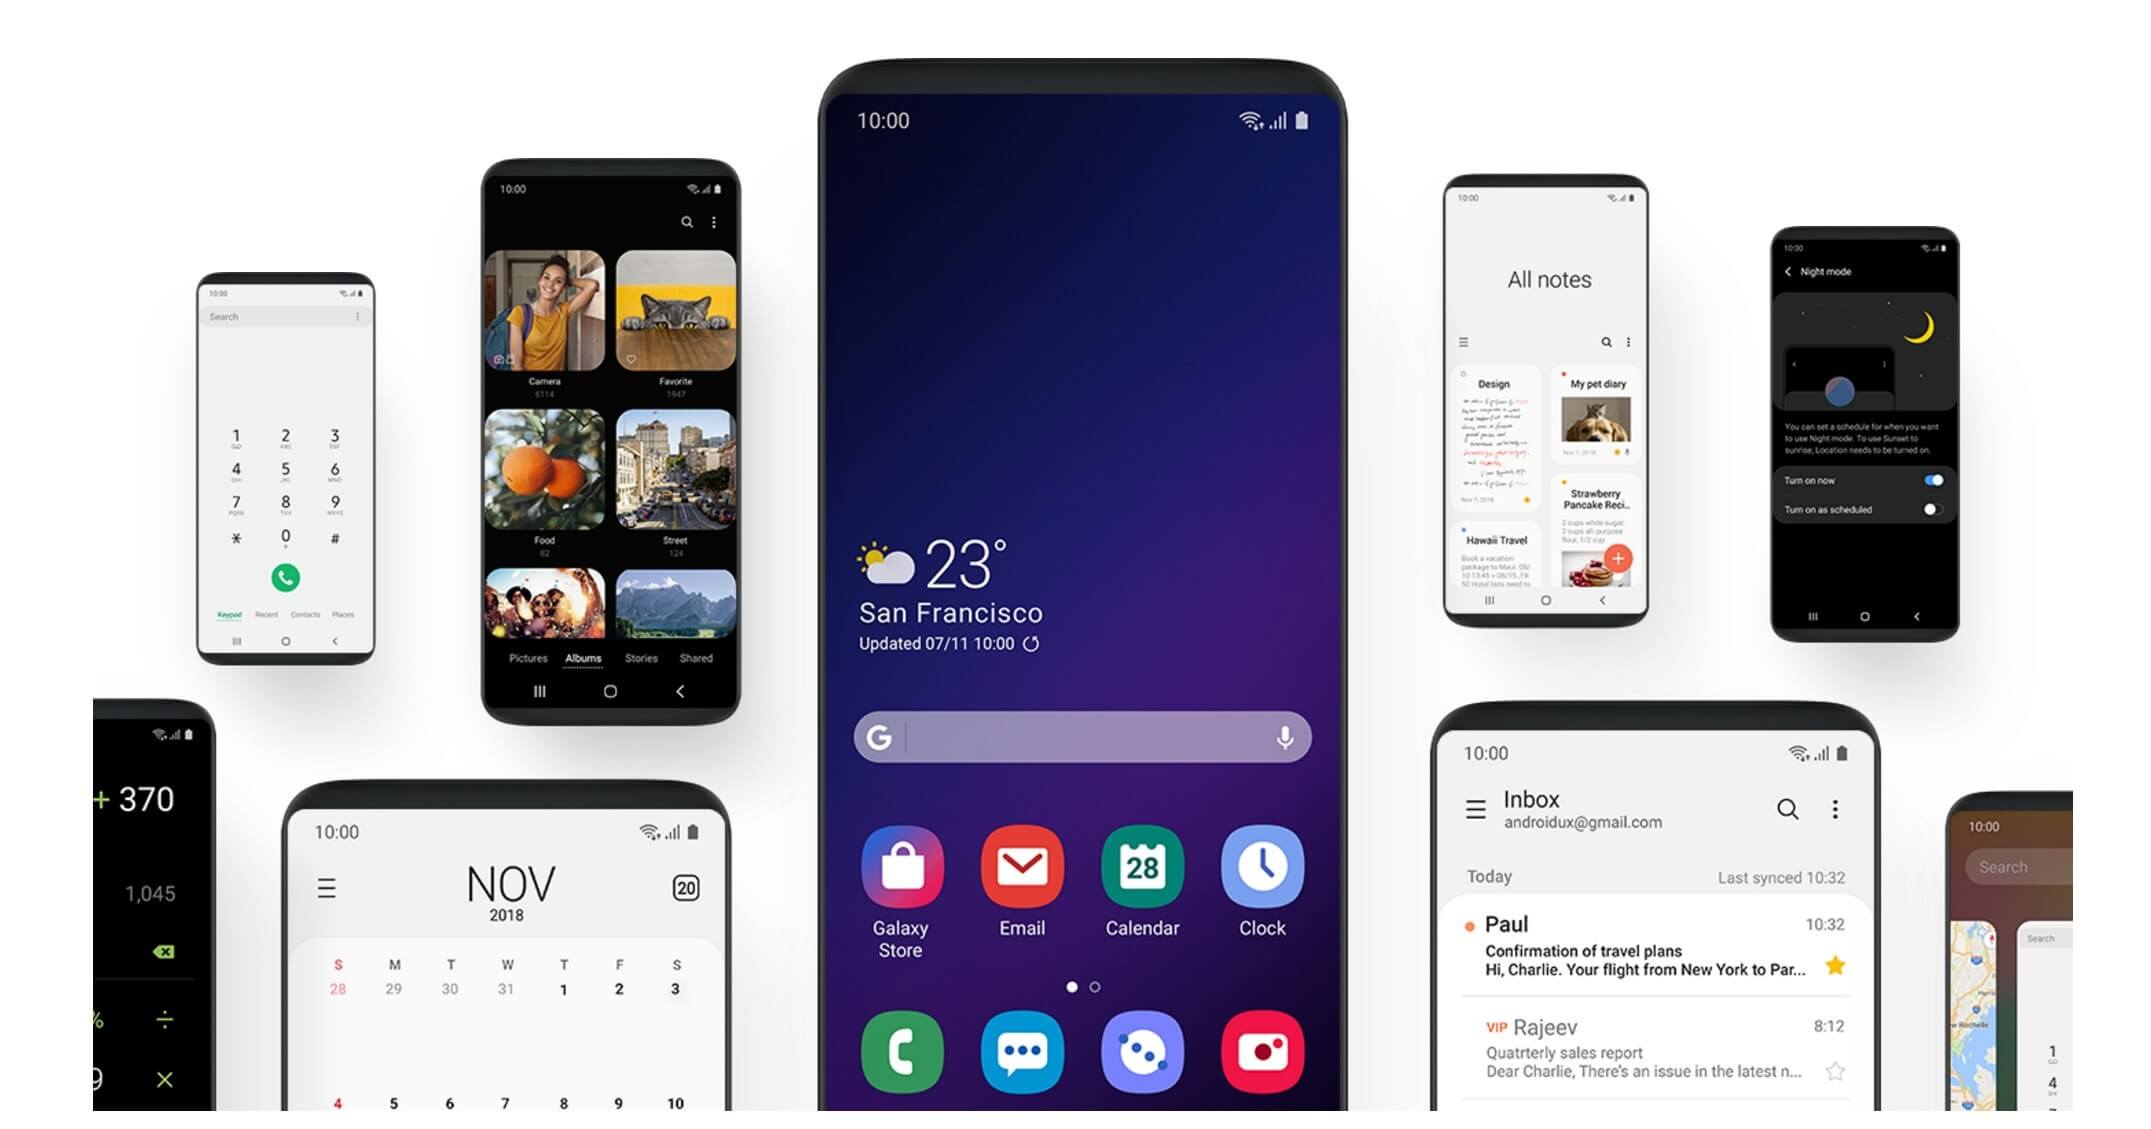 Samsung's One UI skin makes using large Galaxy handsets easier